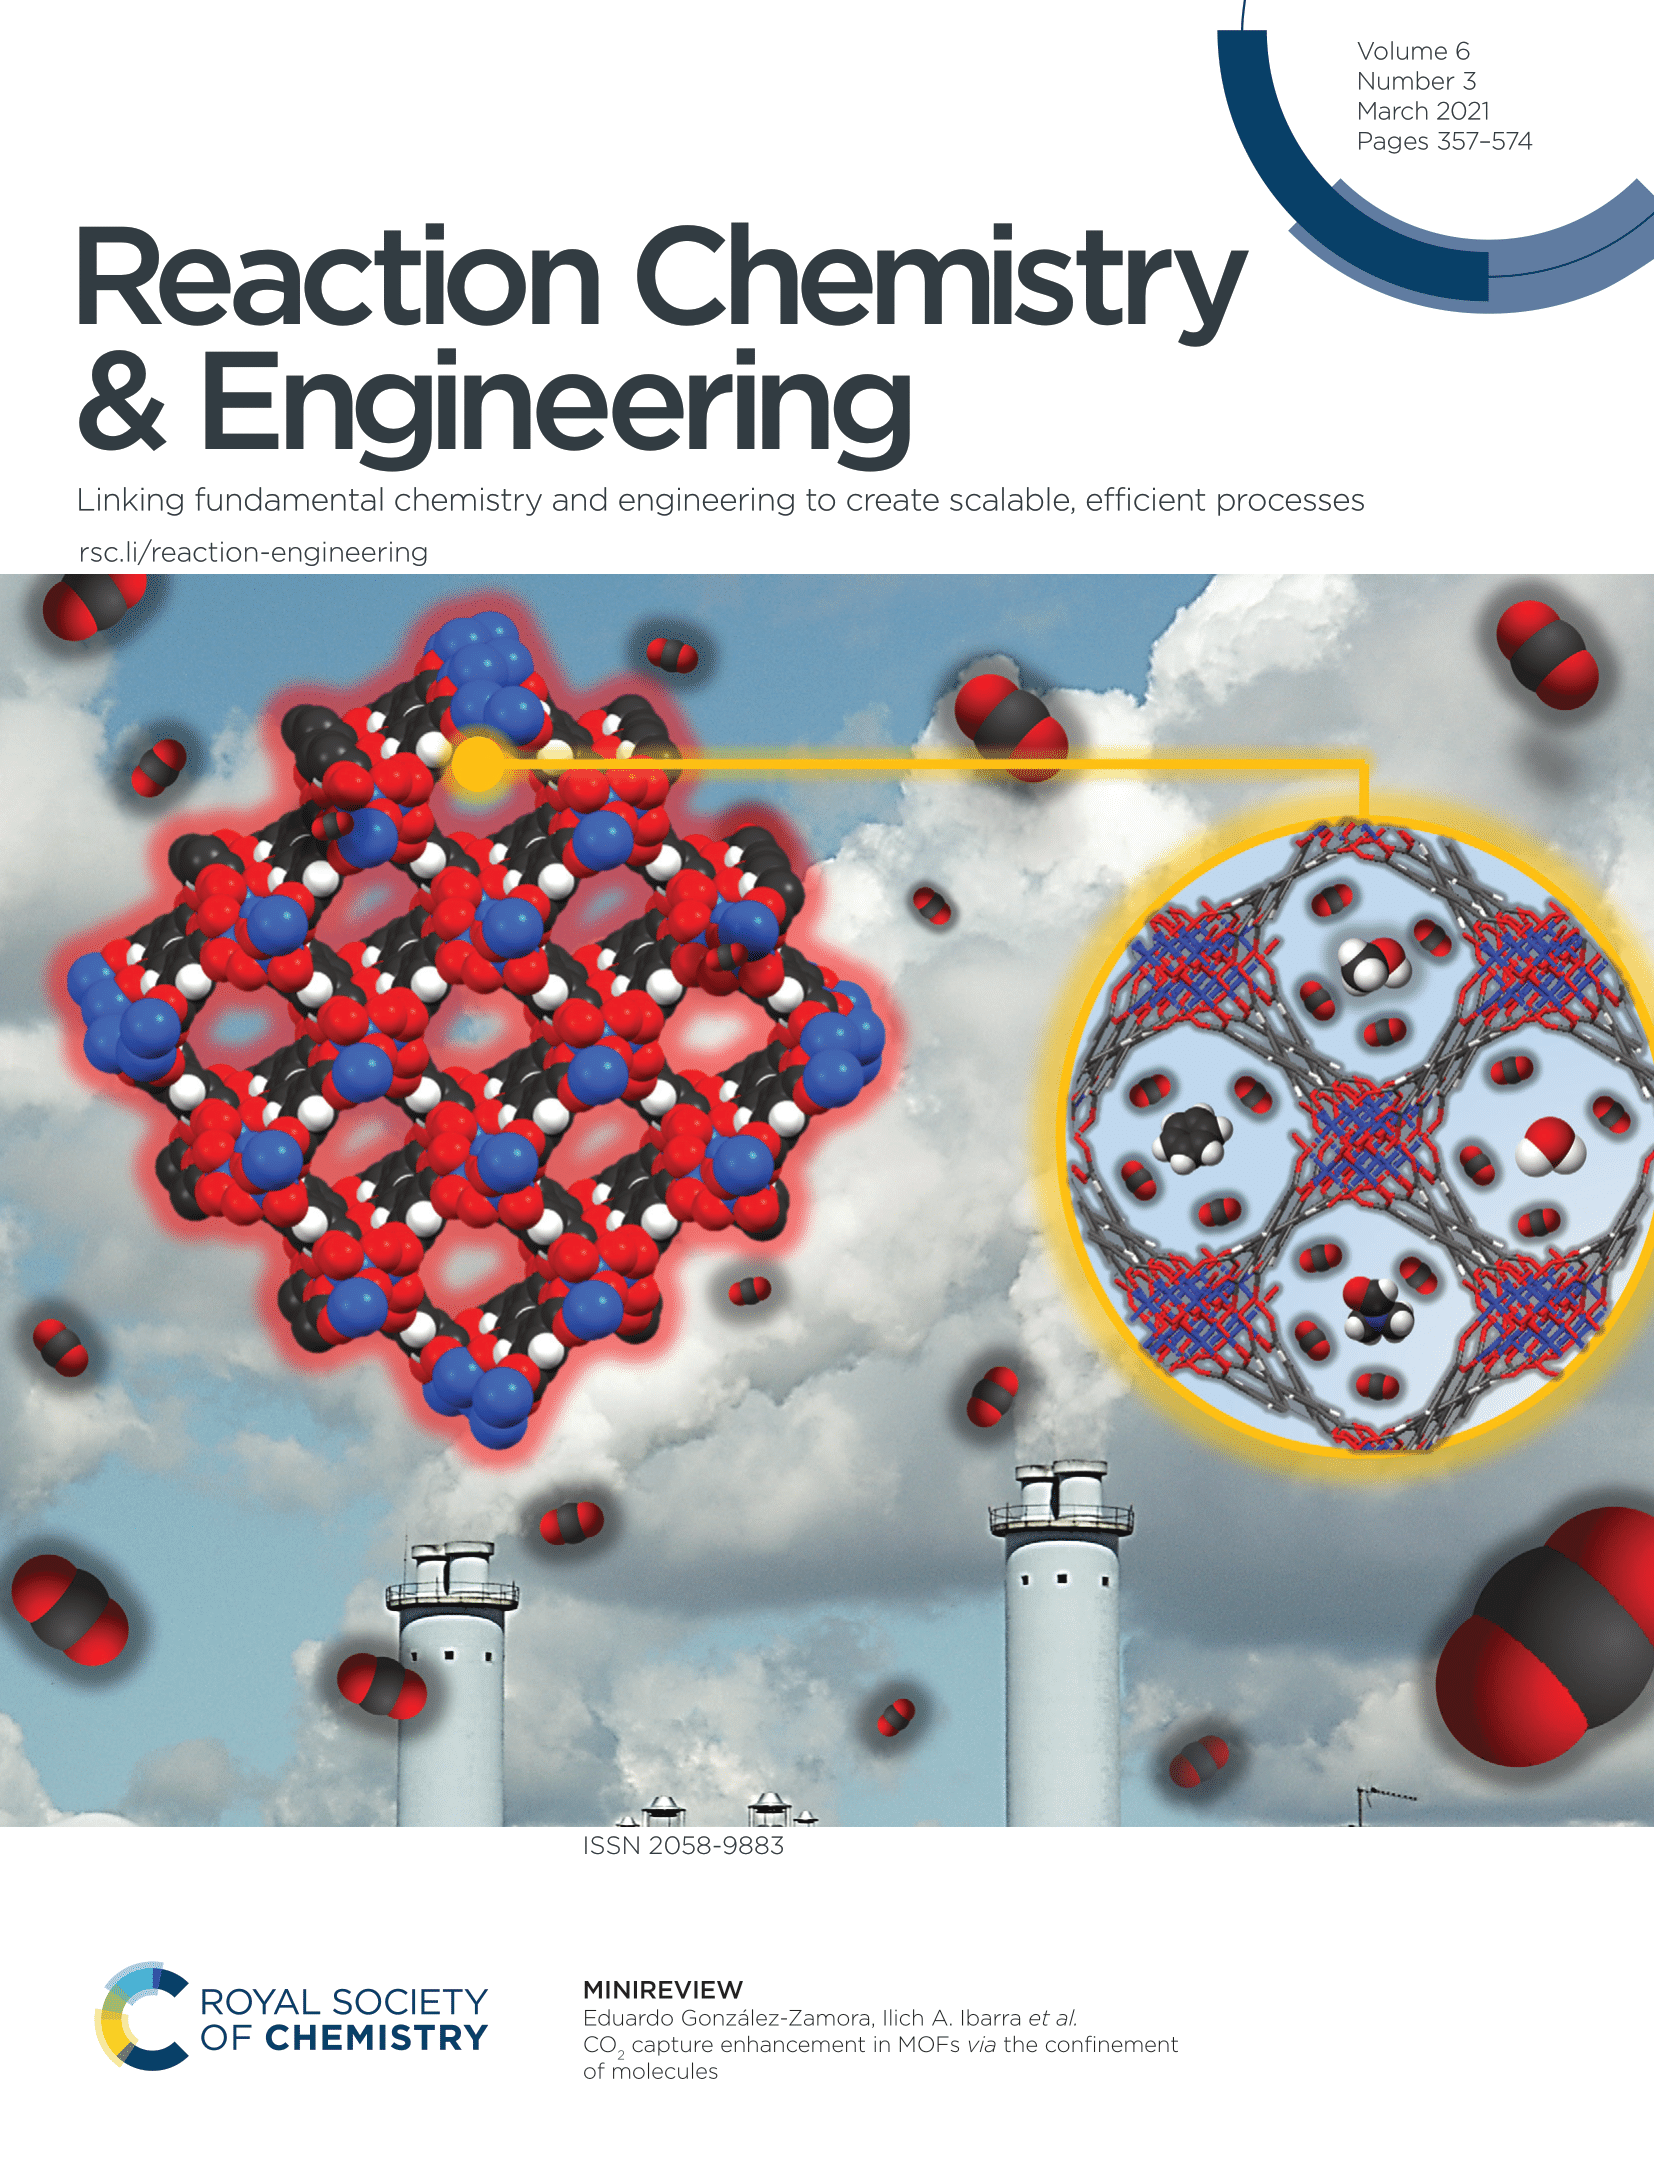 Reaction Chemistry & Engineering_Inside Front Cover of the Magazine: